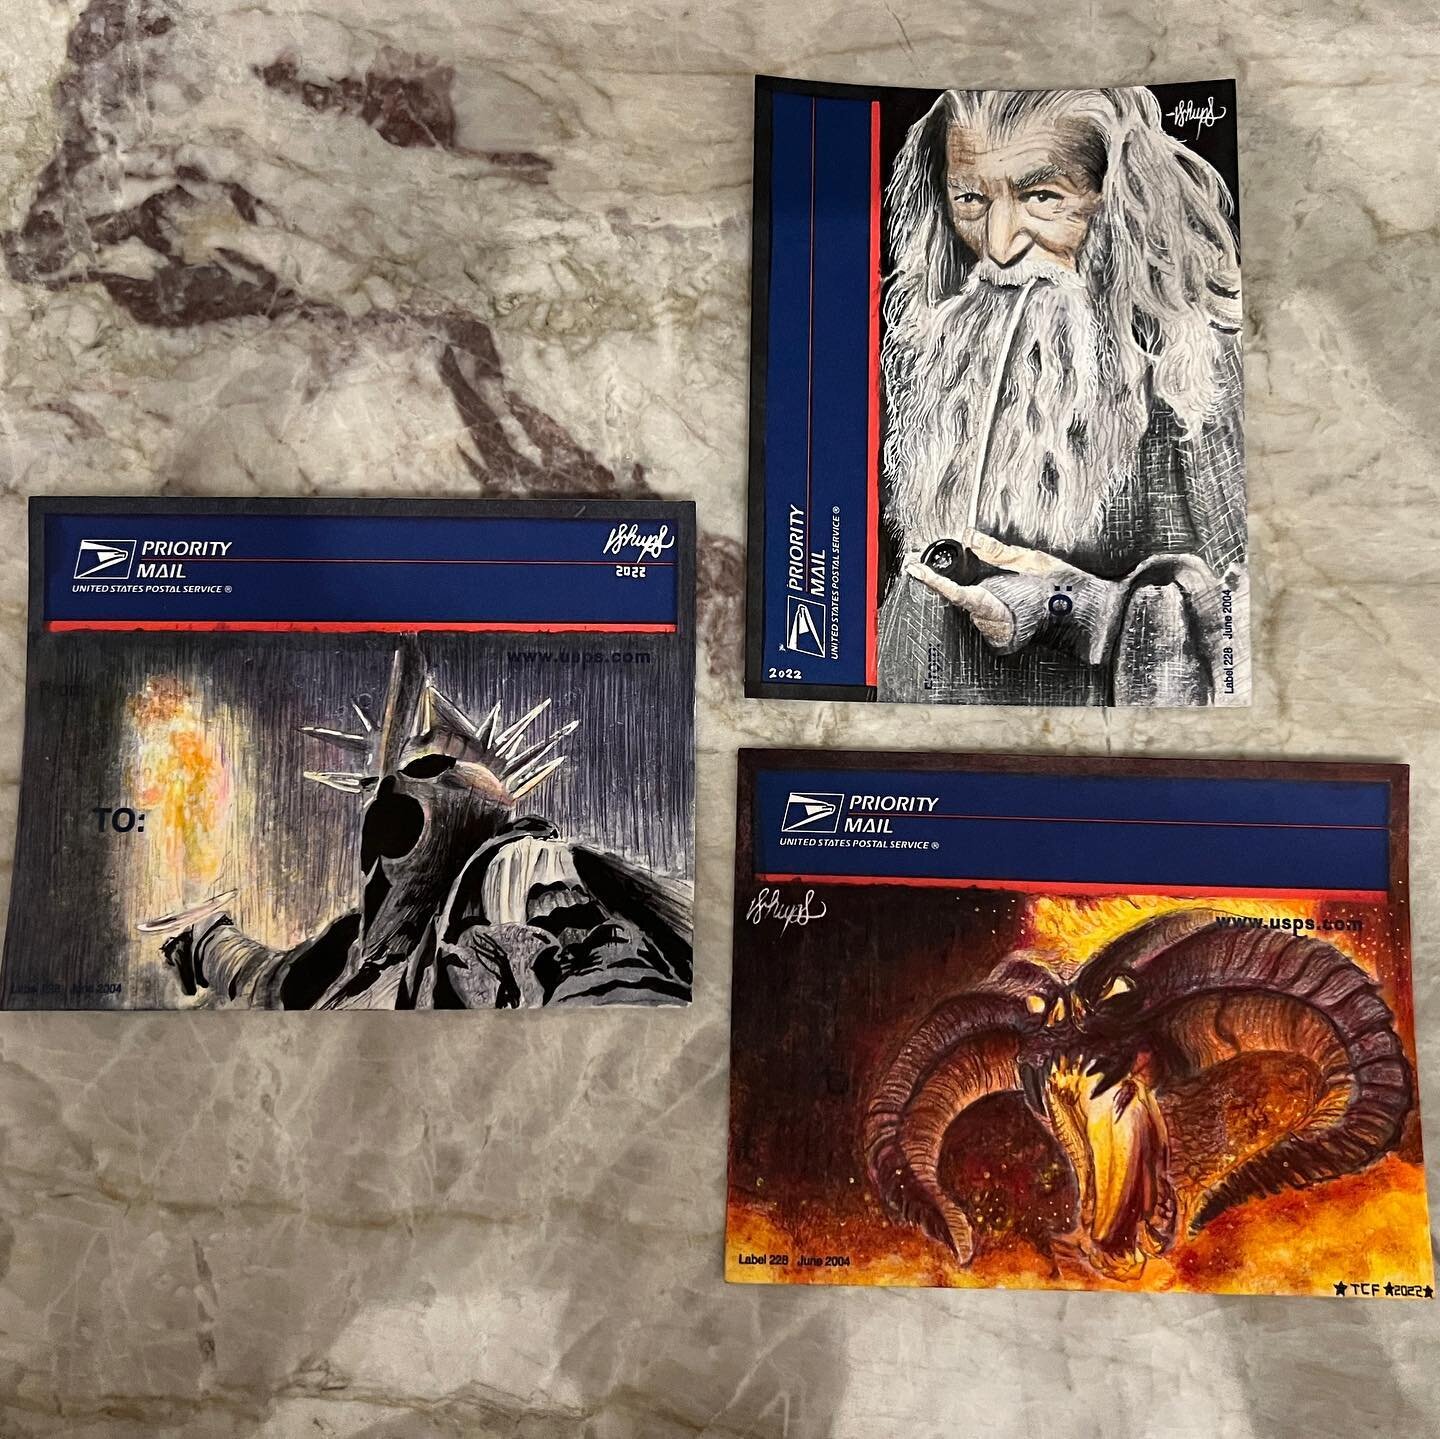 What&rsquo;s better than going on vacation? Coming home to a package from one of my favorite artists, @_whups . I commissioned _whups to create these amazing #lotr portraits and they are simply amazing. The detail is astounding and the line strokes p